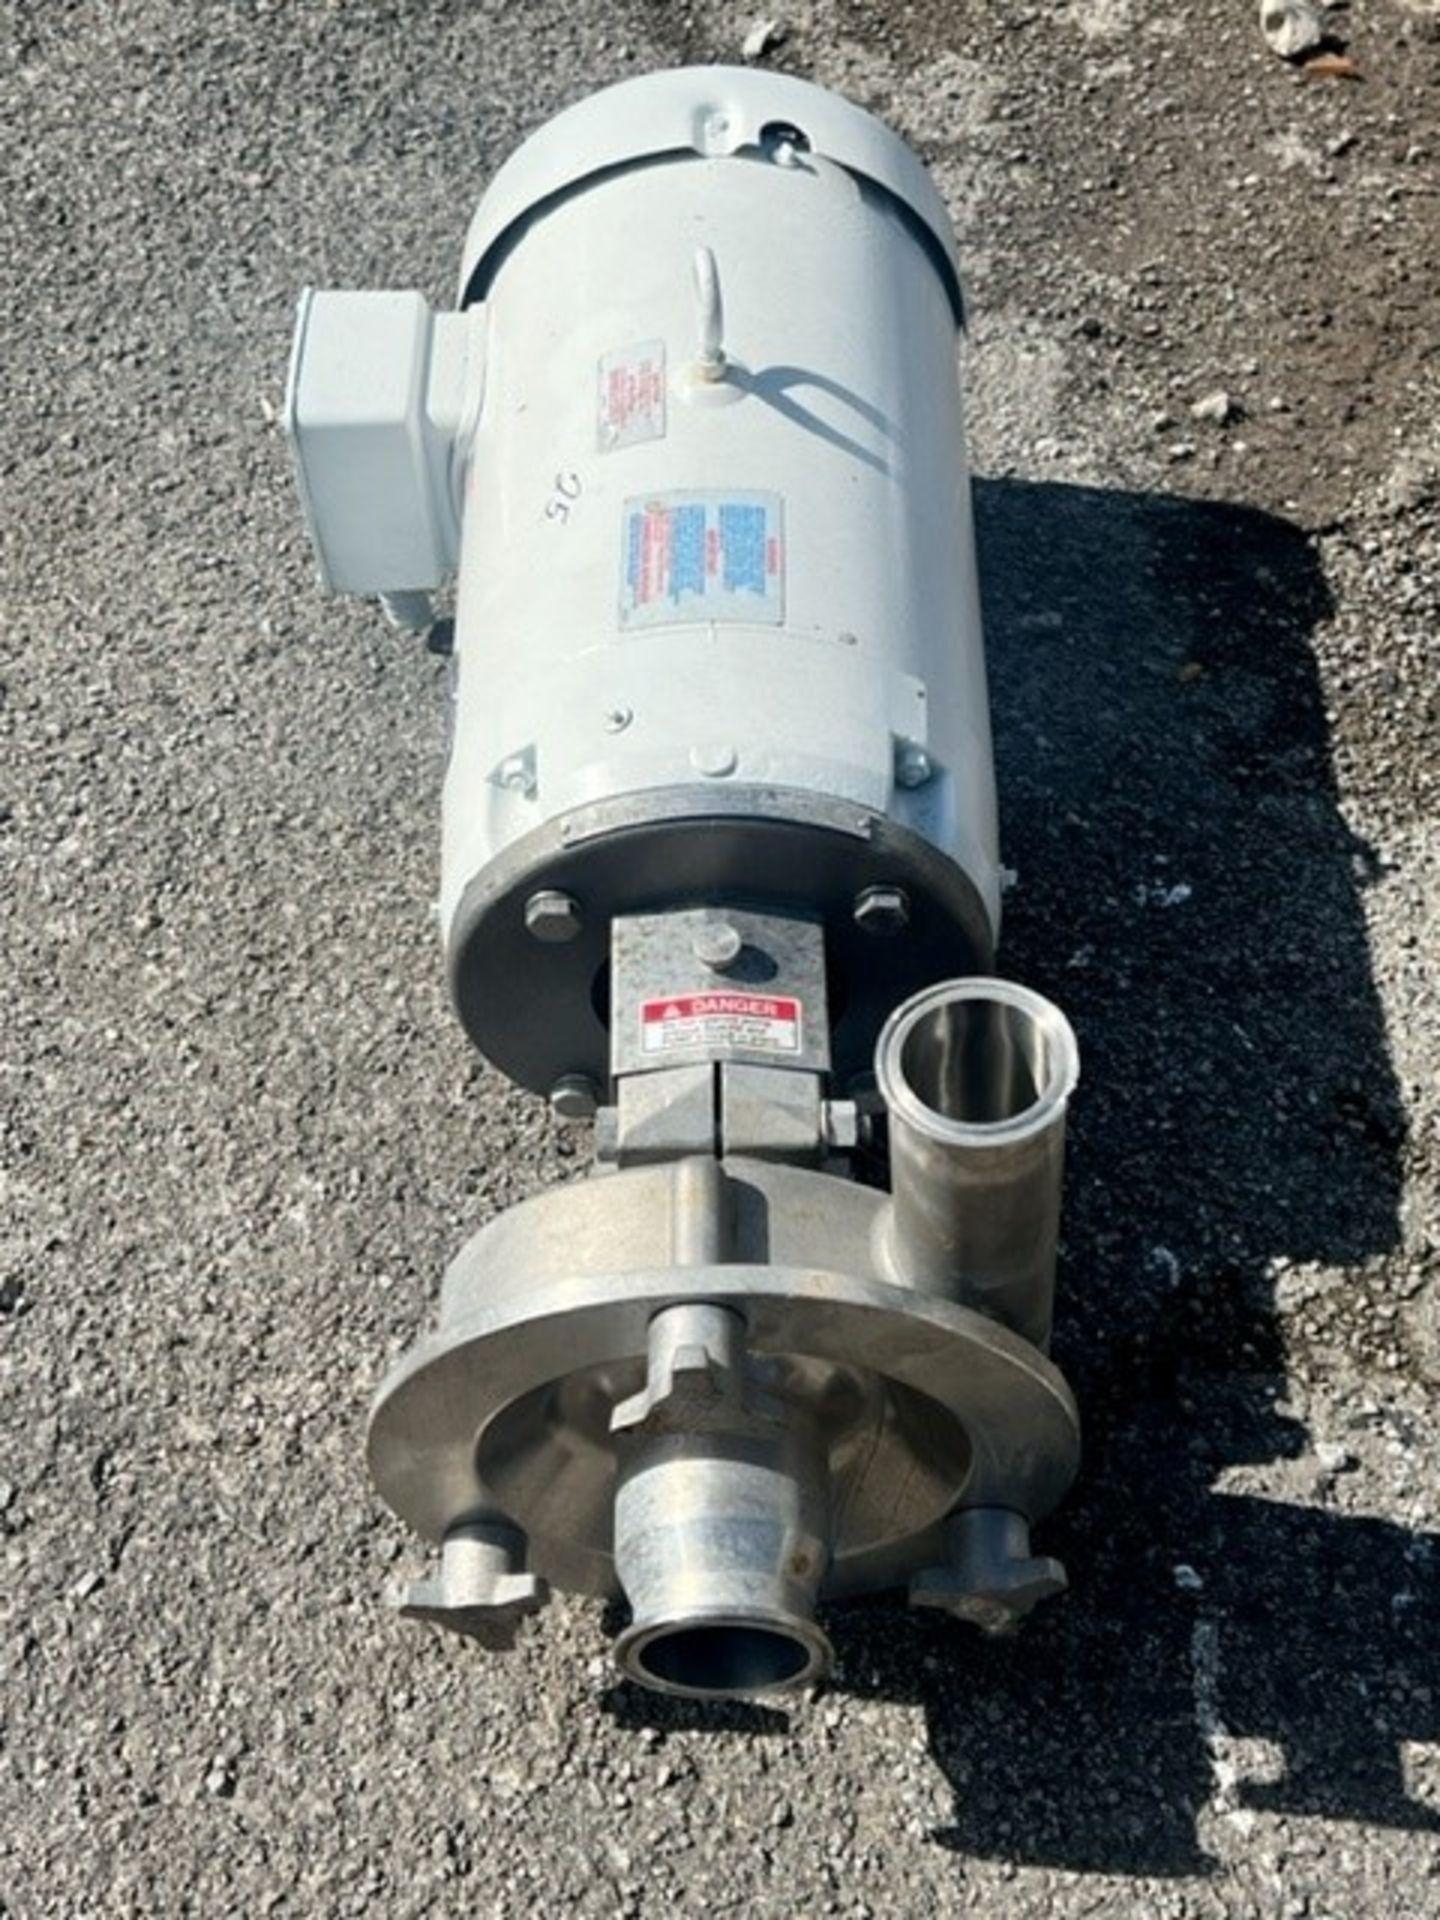 Fristam 7.5 hp Centrifugal Pump, Model FPX35 with 2" x 2.5" Clamp Type SS Head, Baldor 3500 RPM, - Image 3 of 5